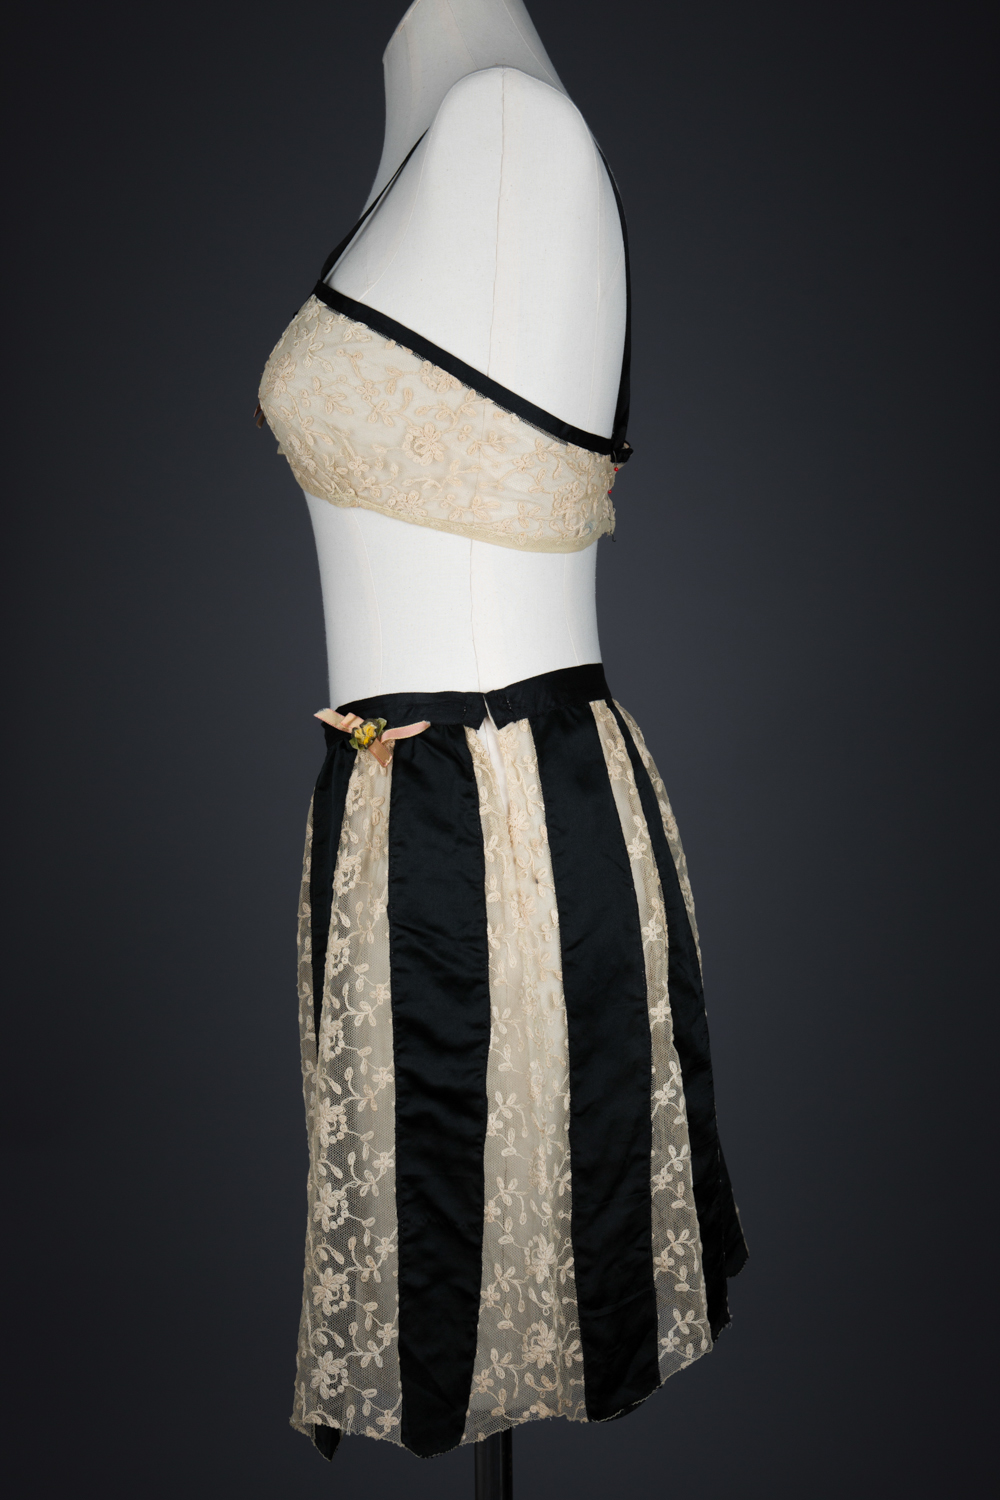 Black Silk & Embroidered Tulle Bra & Tap Pants by Owl Make, c. 1920s, USA. The Underpinnings Museum. Photography by Tigz Rice.